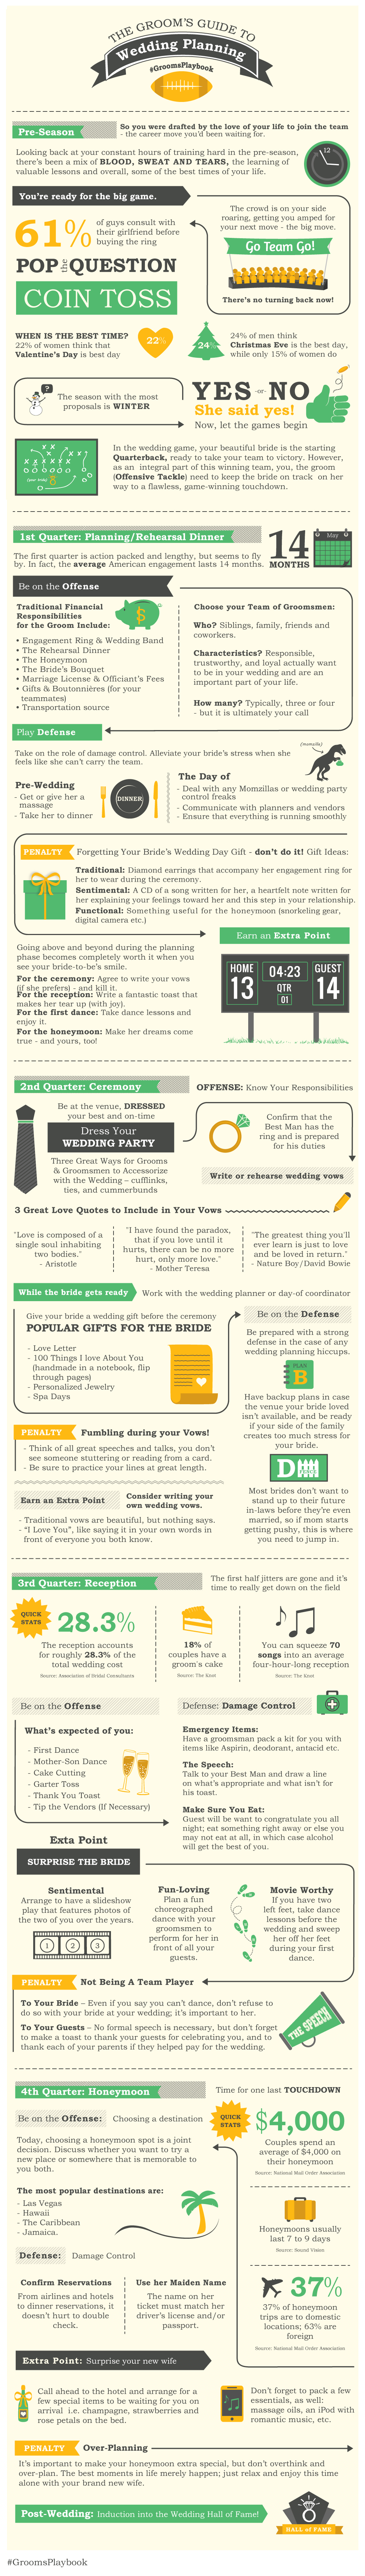 The groom’s guide to wedding planning